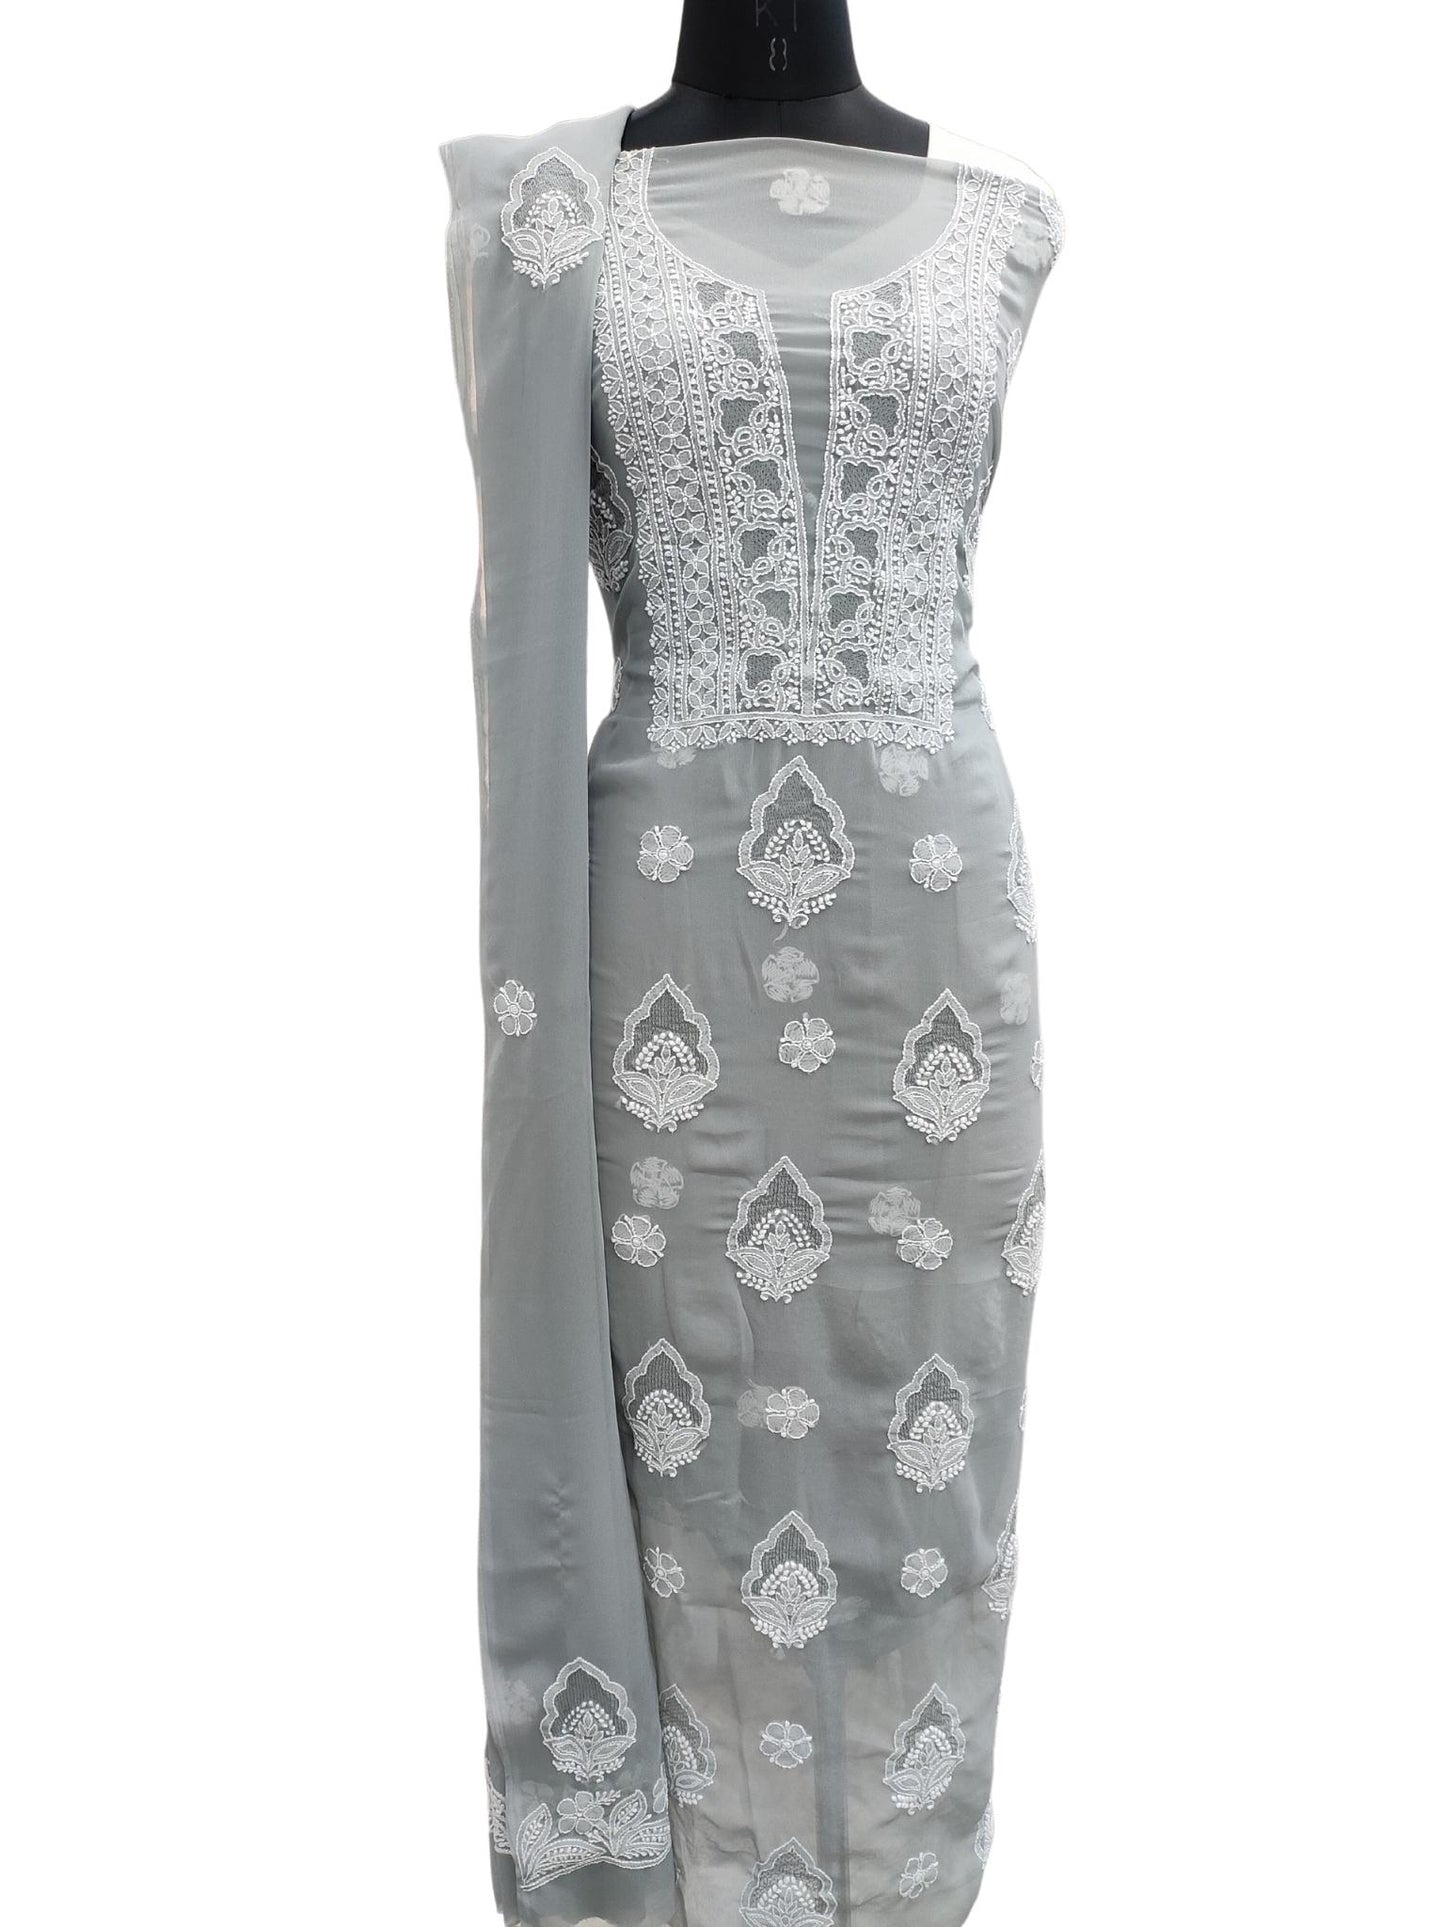 Shyamal Chikan Hand Embroidered High Quality Grey Georgette Lucknowi Chikankari Unstitched Suit Piece with Jaali Work - S18290